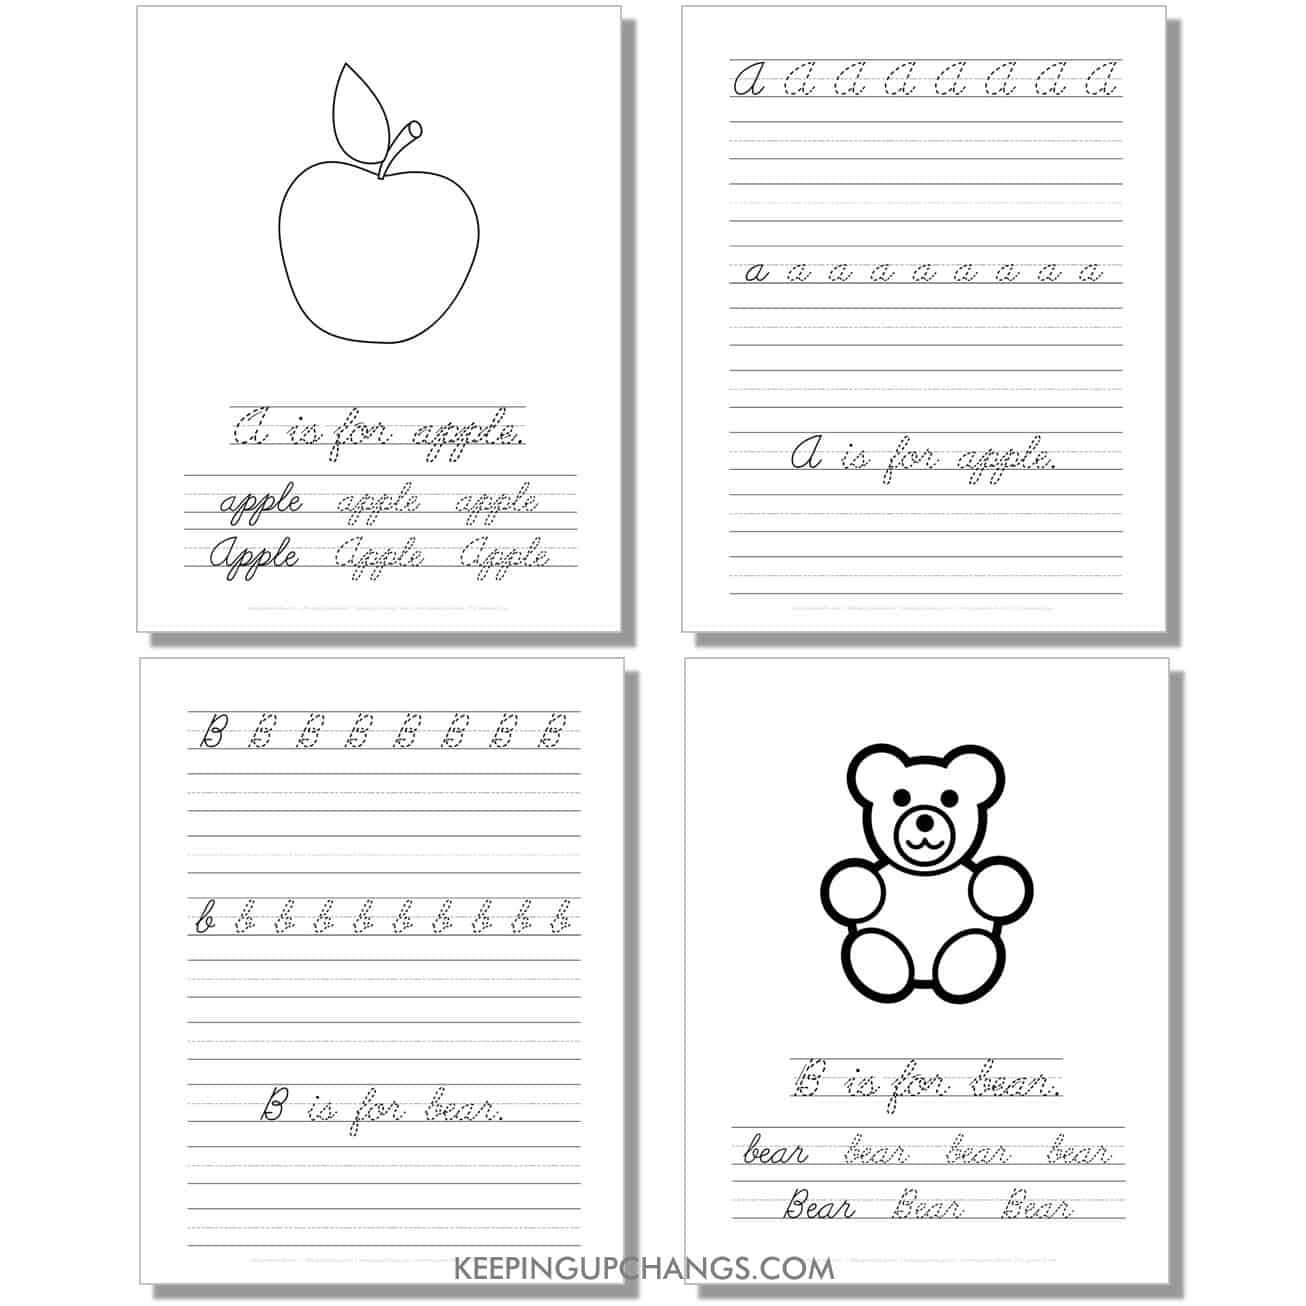 cursive worksheet with uppercase, lowercase letters, sentence for a, b.